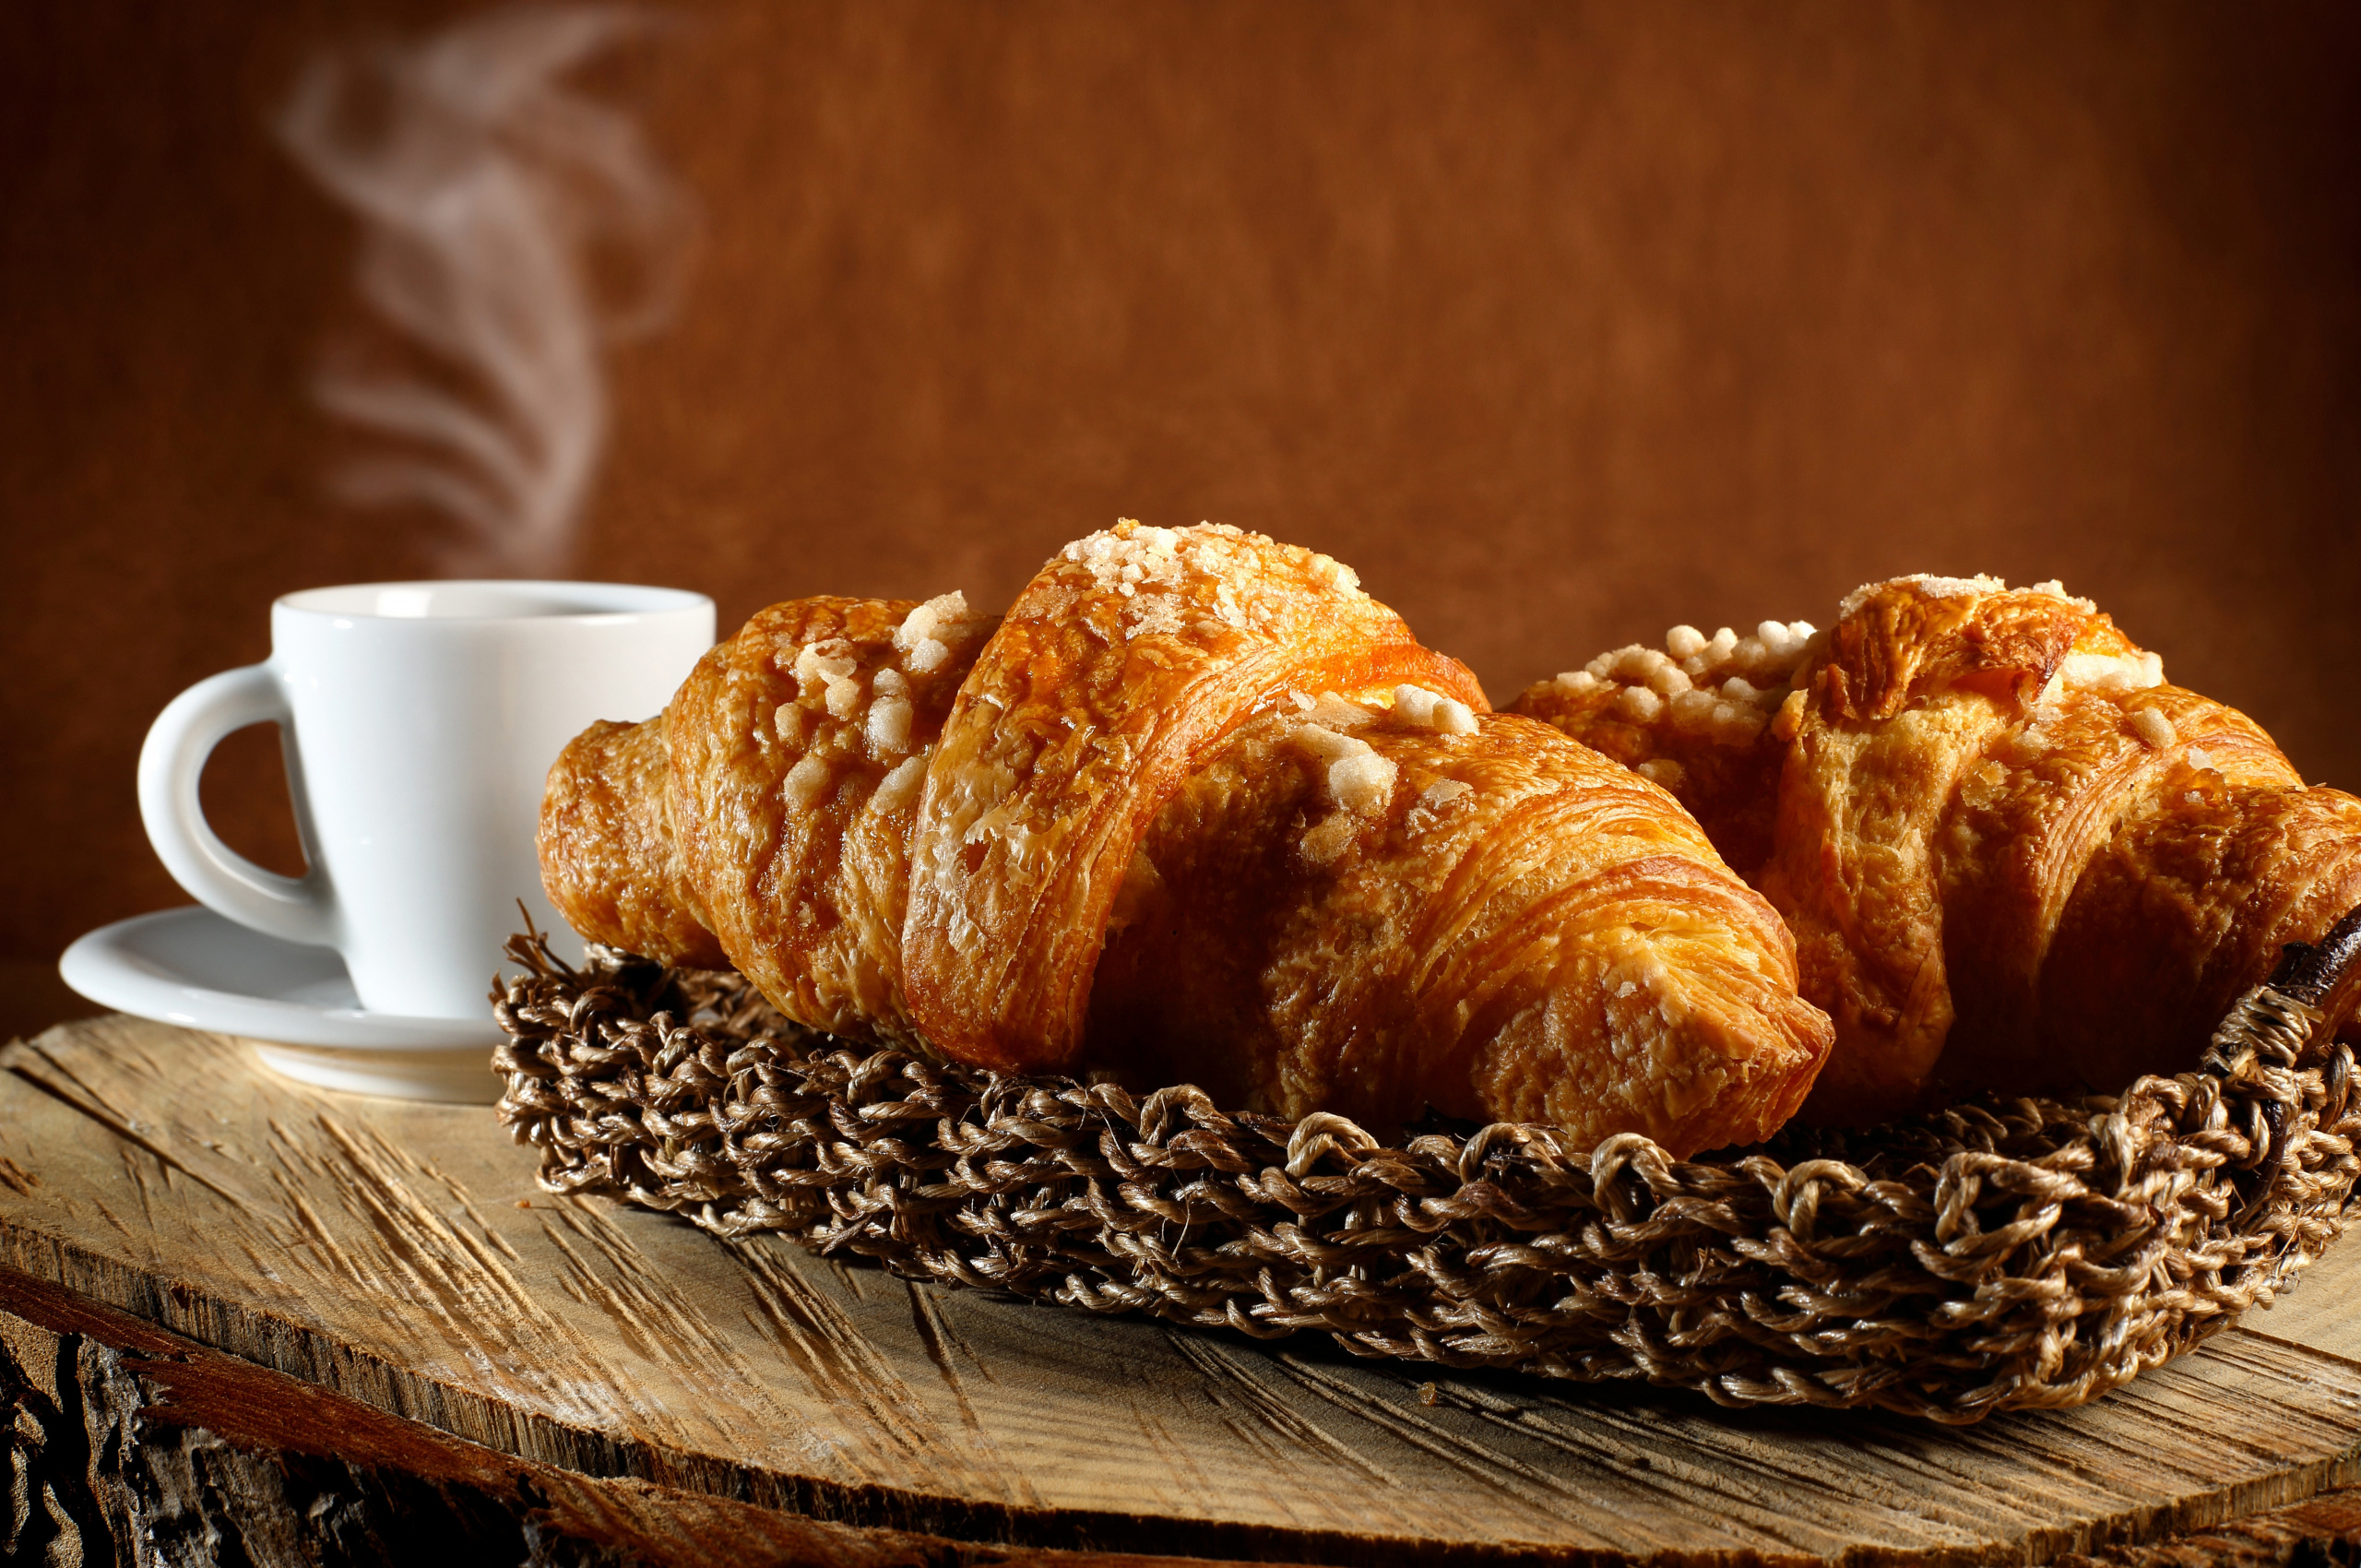 Croissant: The dough is layered with butter, Eaten plain or with jam. 2560x1700 HD Wallpaper.